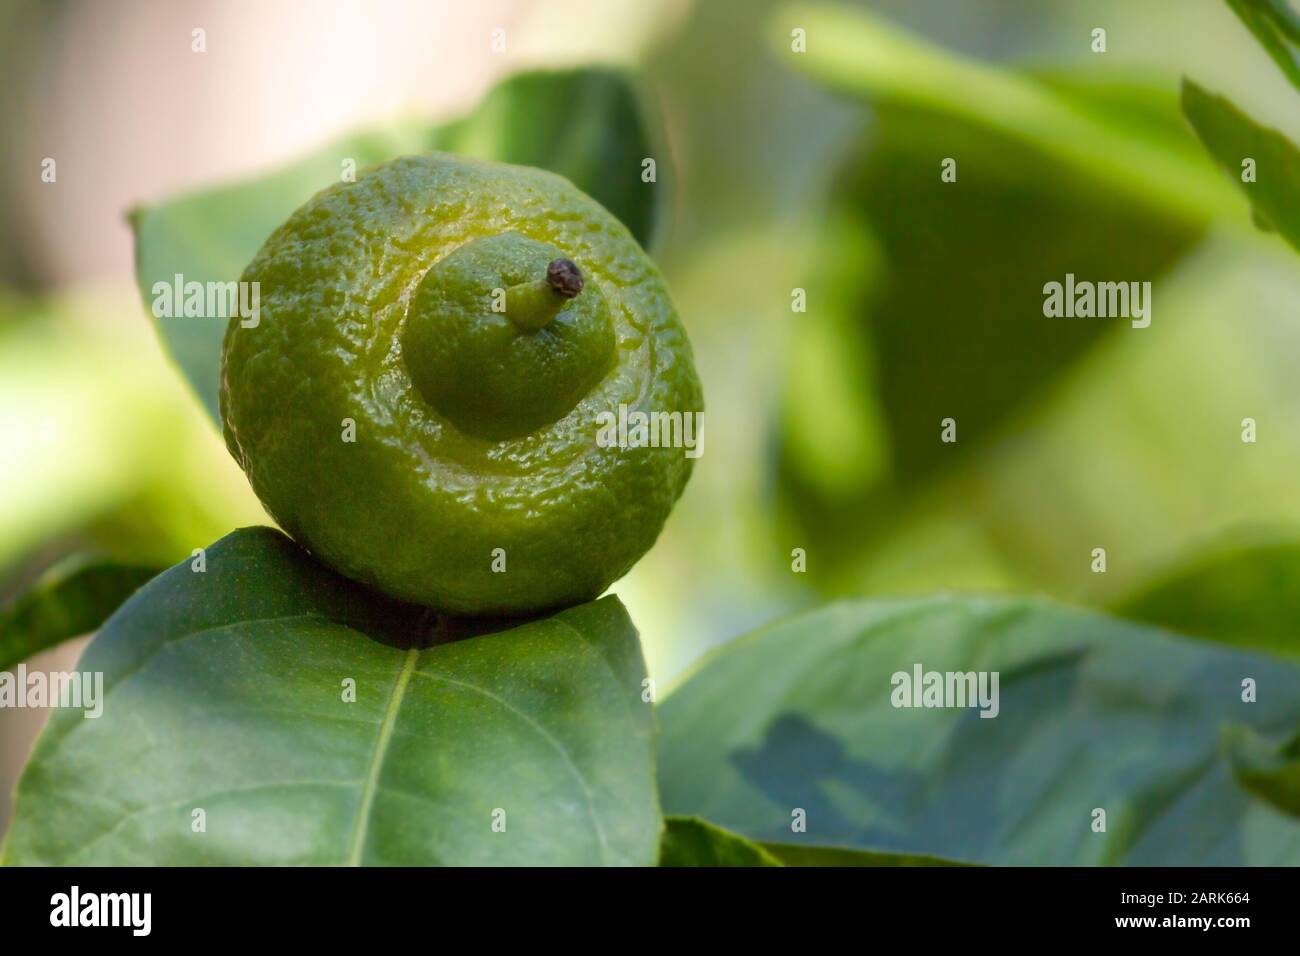 A growing lemon on the tree, with green leaves as background. Stock Photo